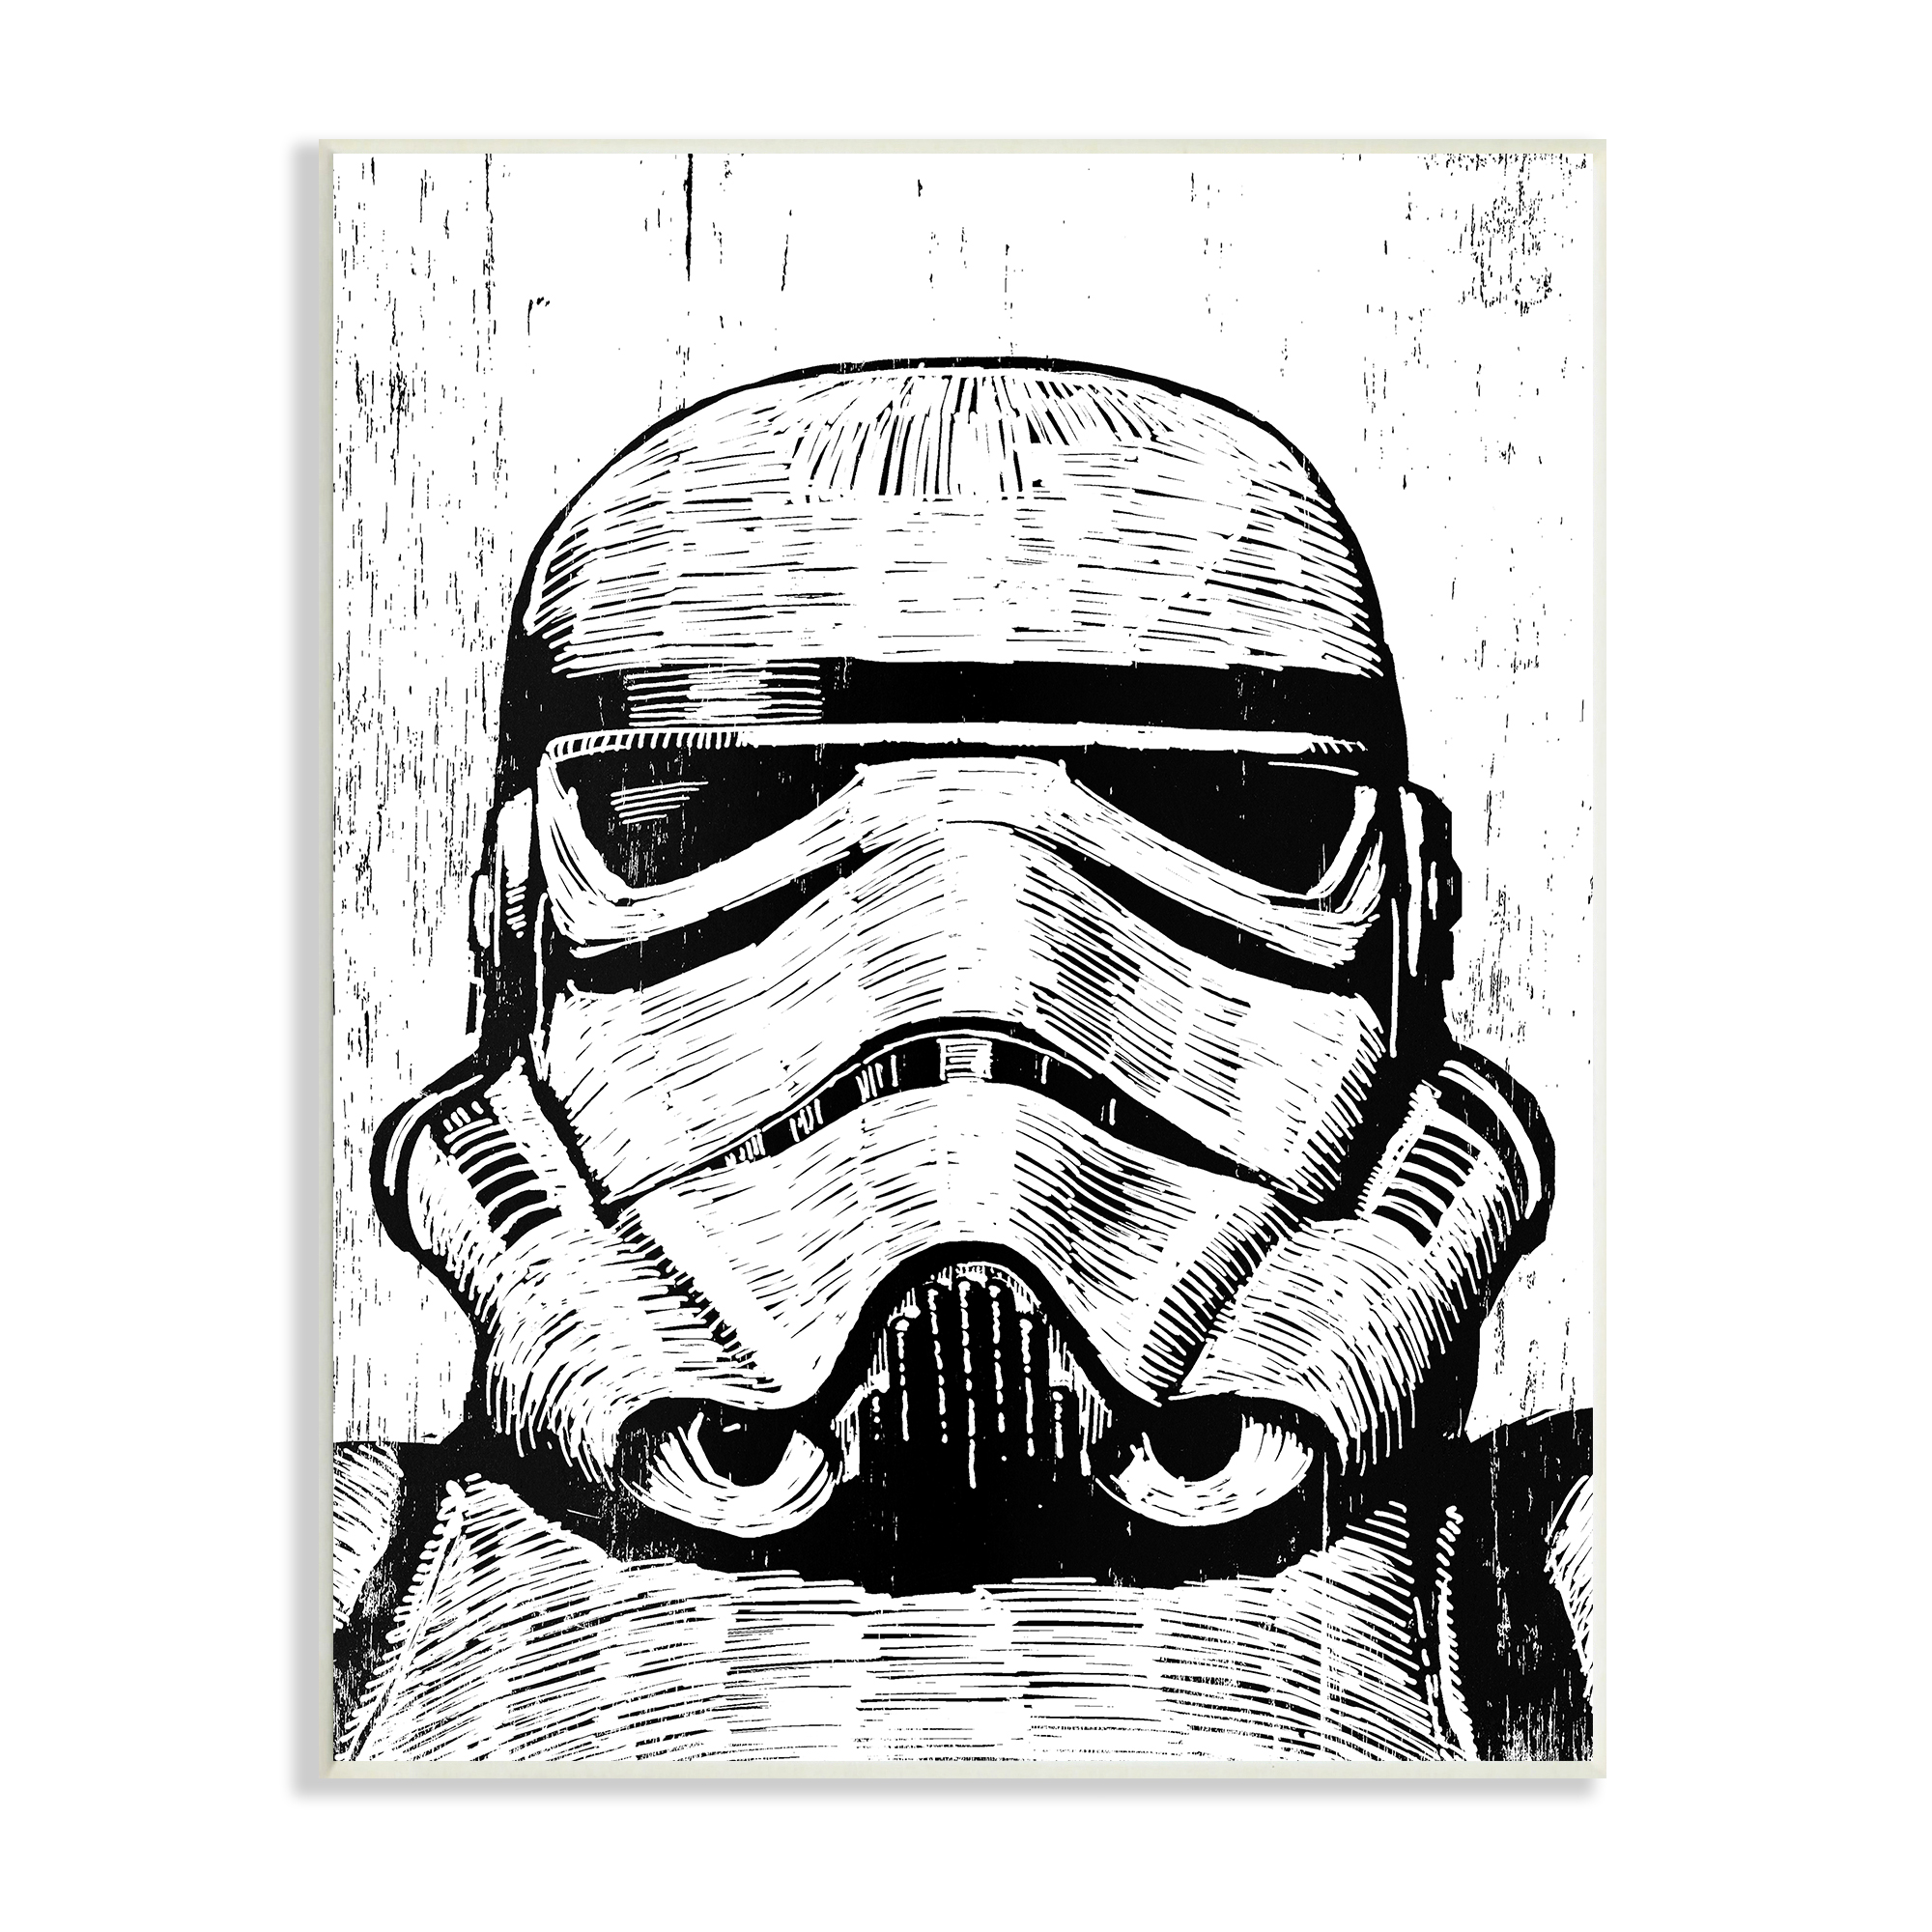 The Stupell Home Decor Collection Black and White Star Wars Stormtrooper Distressed Wood Etching Wall Plaque Art, 10 x 0.5 x 15 - image 1 of 5